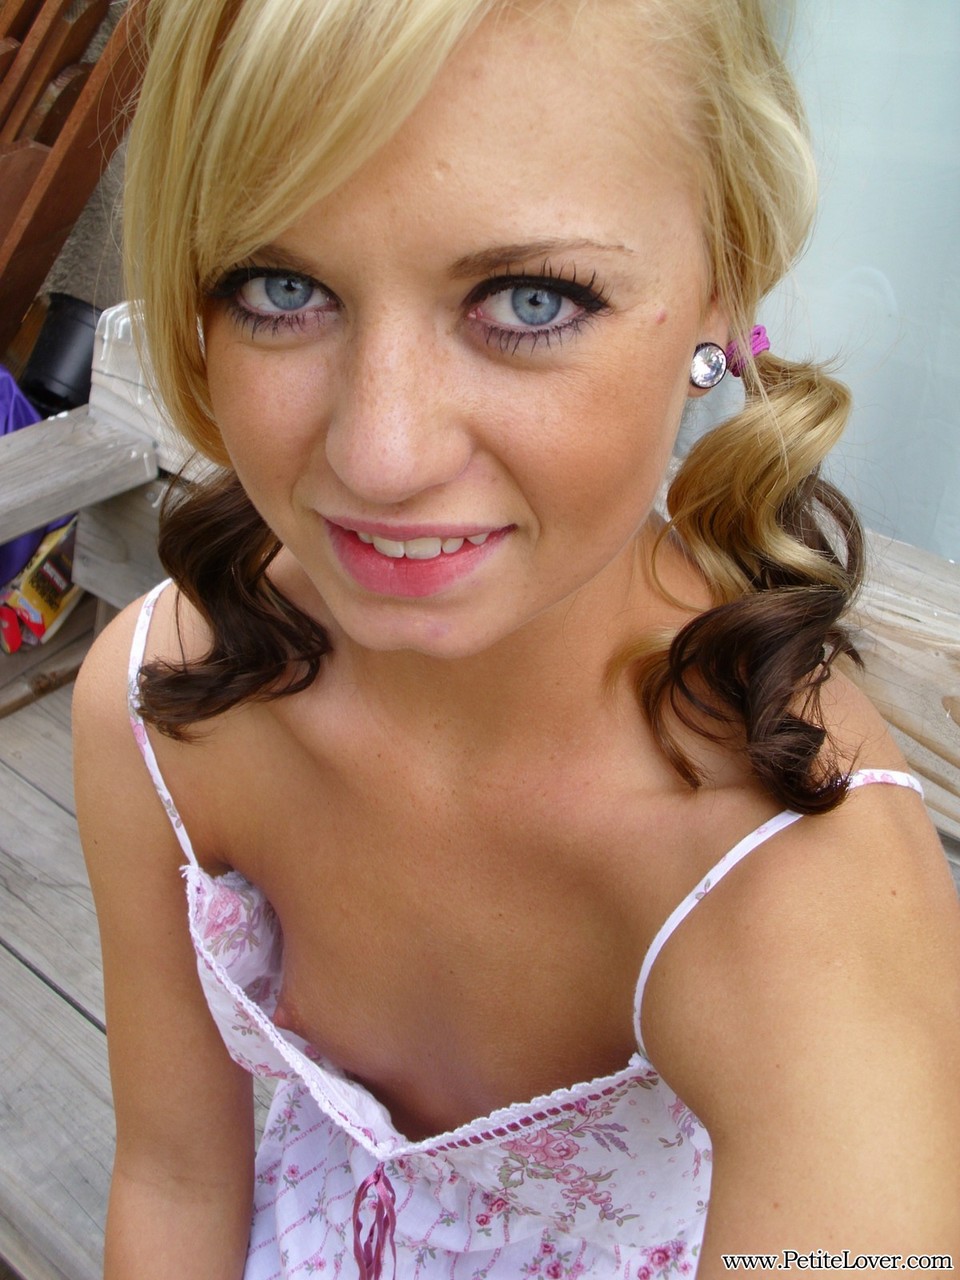 Cute blonde Tiff in pigtails showing off her wee small tits & tiny bald pussy porn photo #428478635 | Petite Lover Pics, Tiff, Amateur, mobile porn